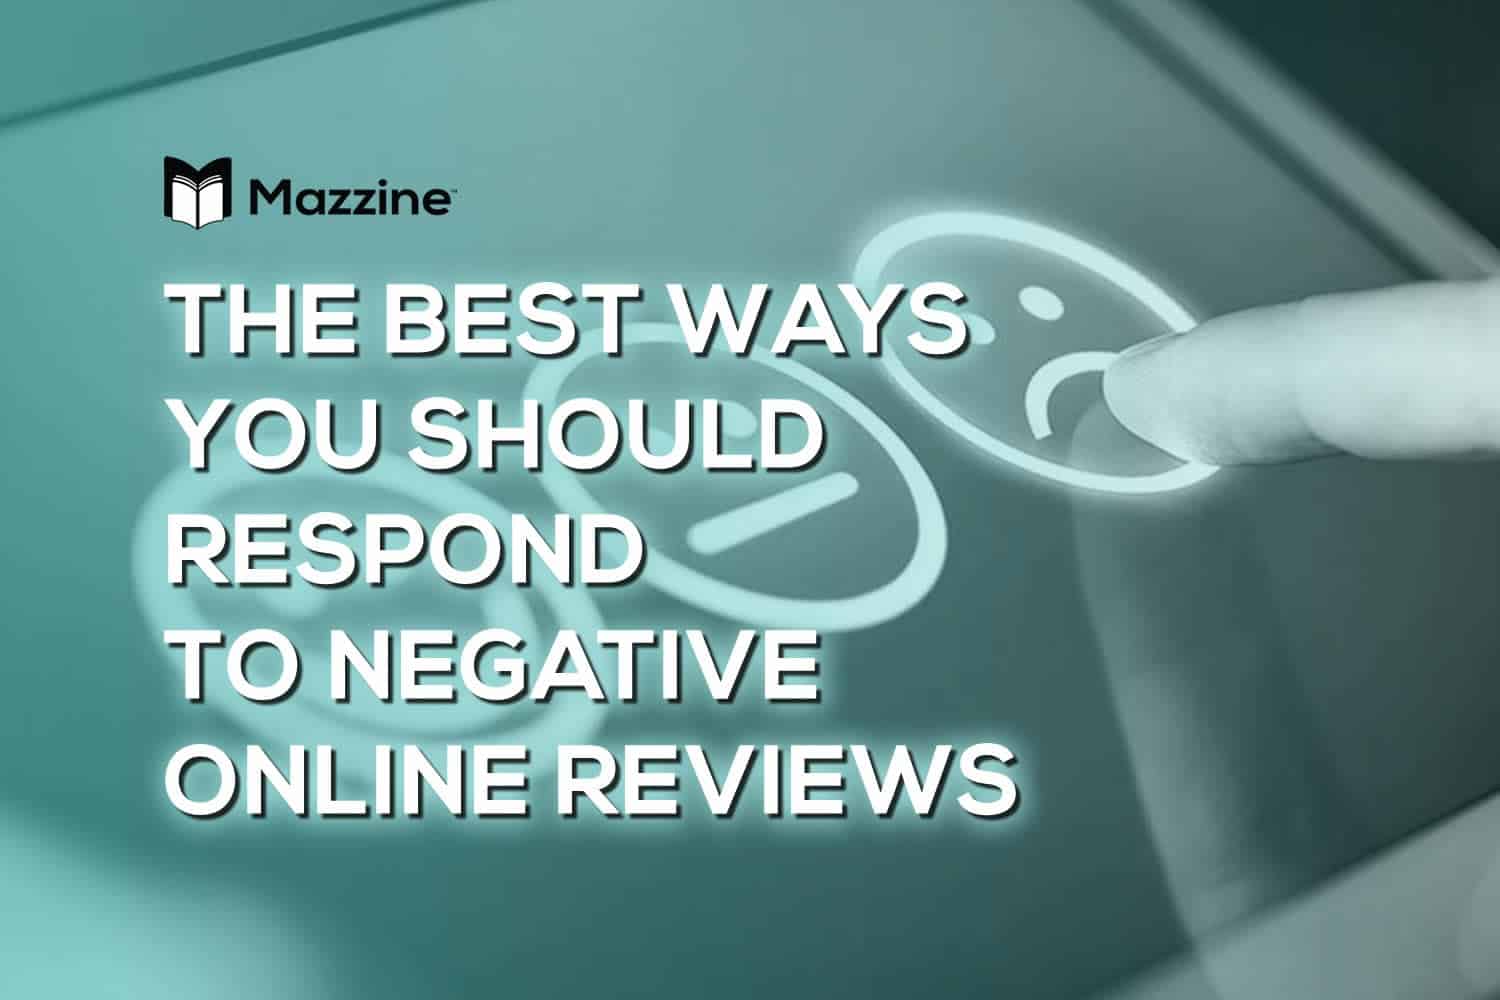 The Best Ways You Should Respond to Negative Online Reviews